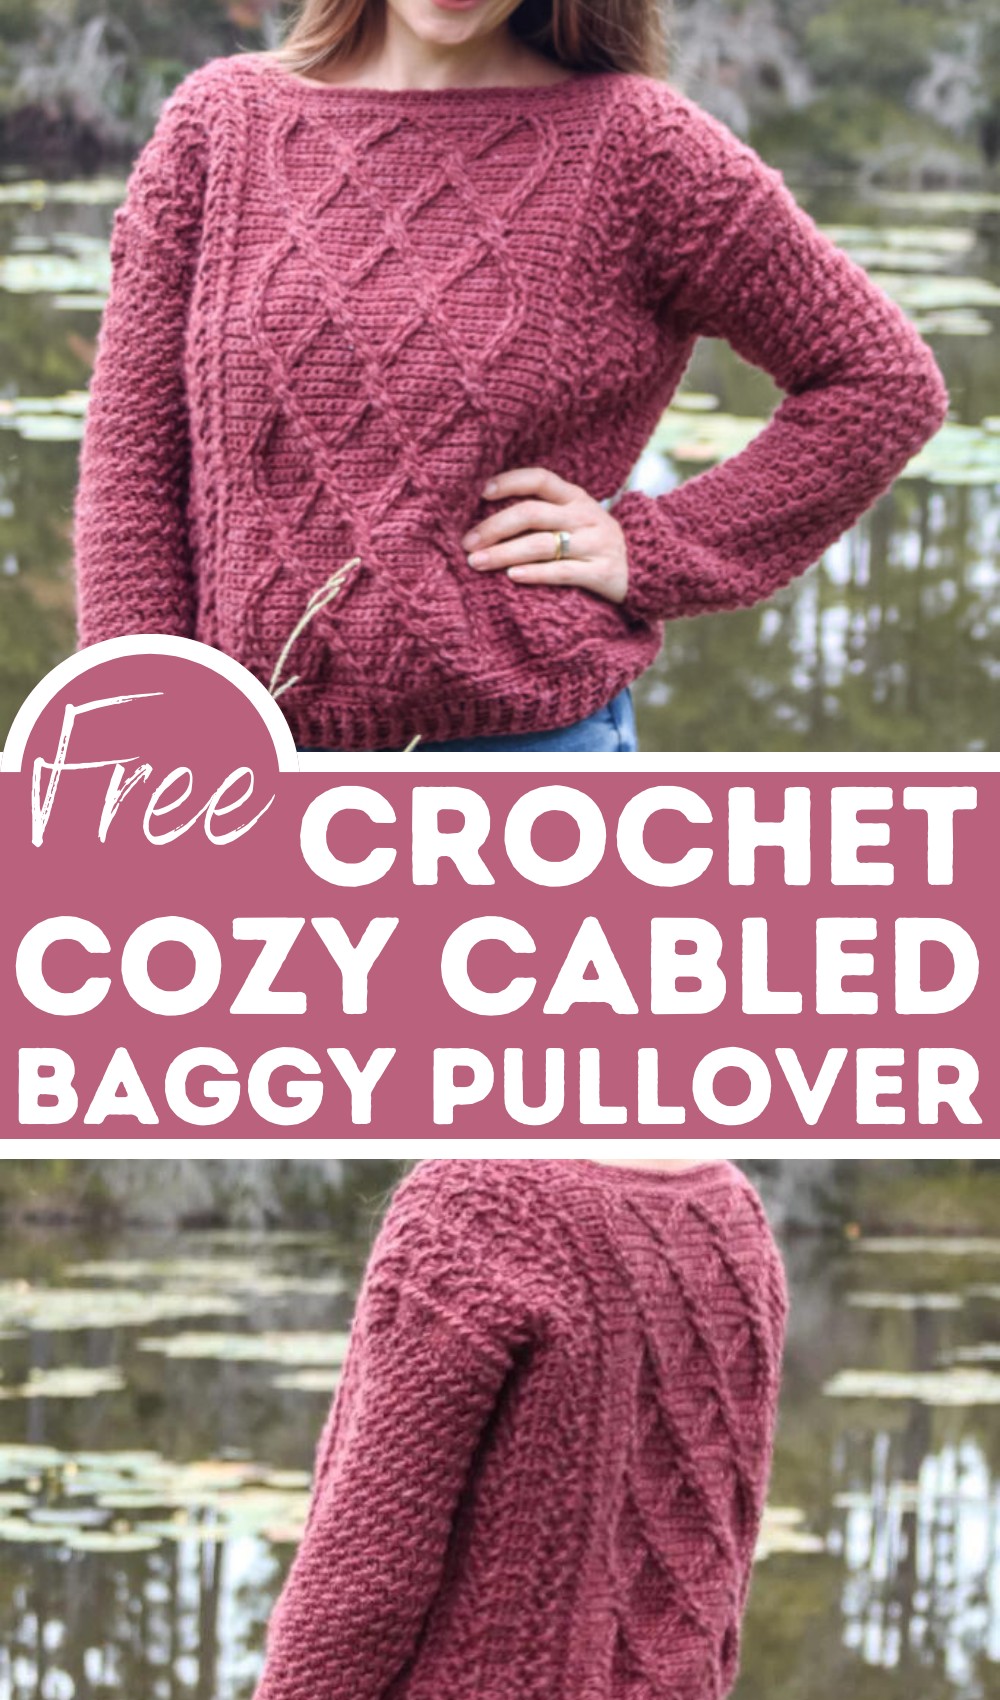 Cozy Cabled Baggy Pullover